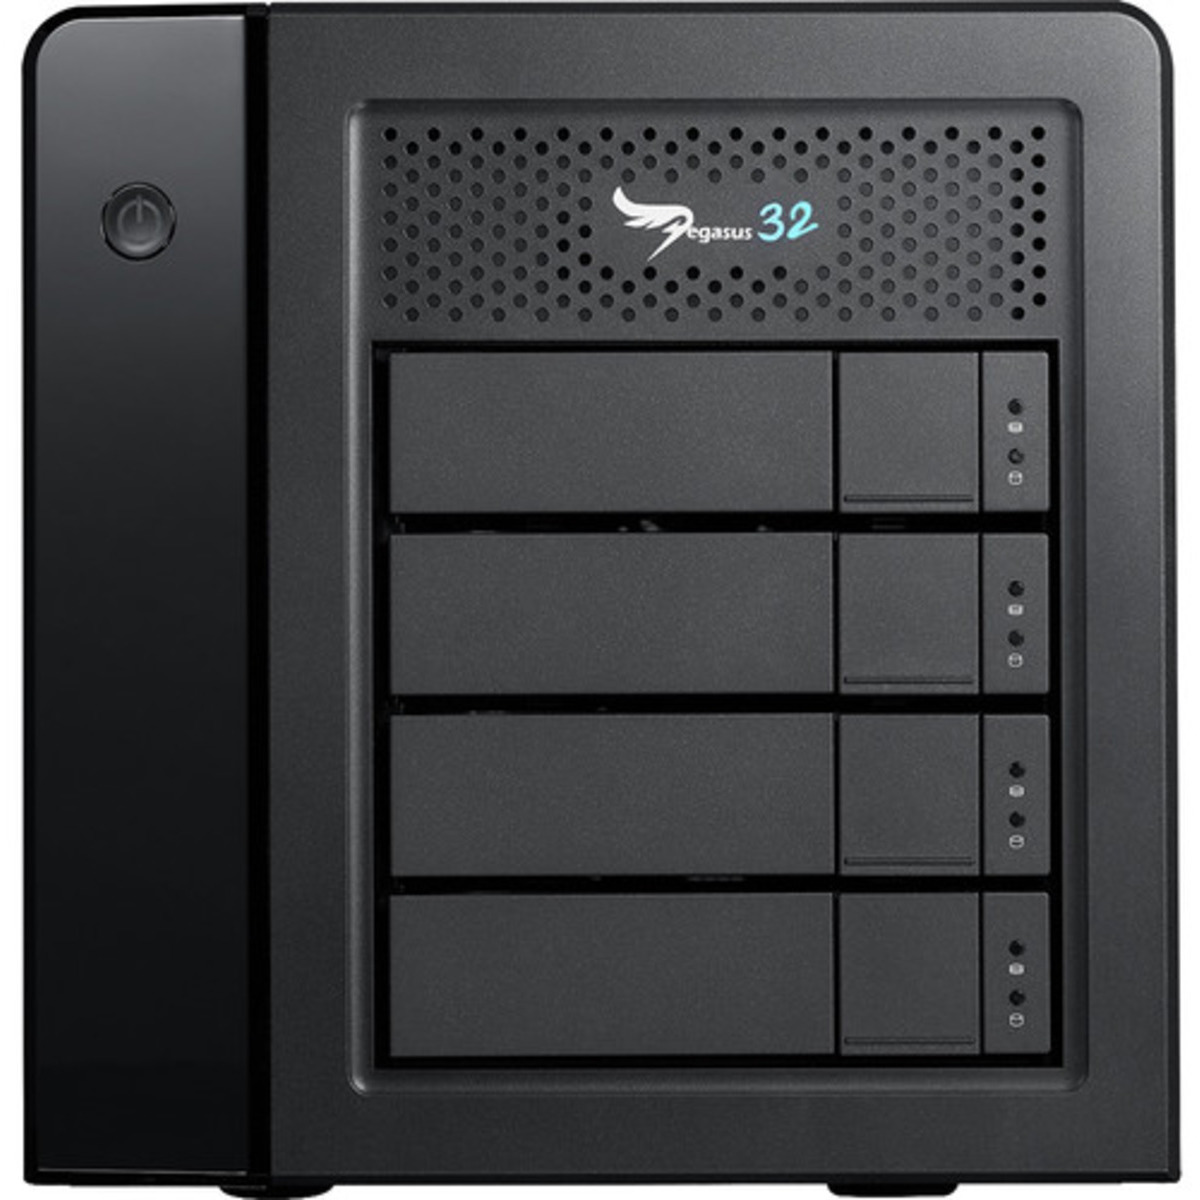 Promise Technology Pegasus32 R4 Thunderbolt 3 88tb 4-Bay Desktop Multimedia / Power User / Business DAS - Direct Attached Storage Device 4x22tb Seagate EXOS X22 ST22000NM001E 3.5 7200rpm SATA 6Gb/s HDD ENTERPRISE Class Drives Installed - Burn-In Tested Pegasus32 R4 Thunderbolt 3